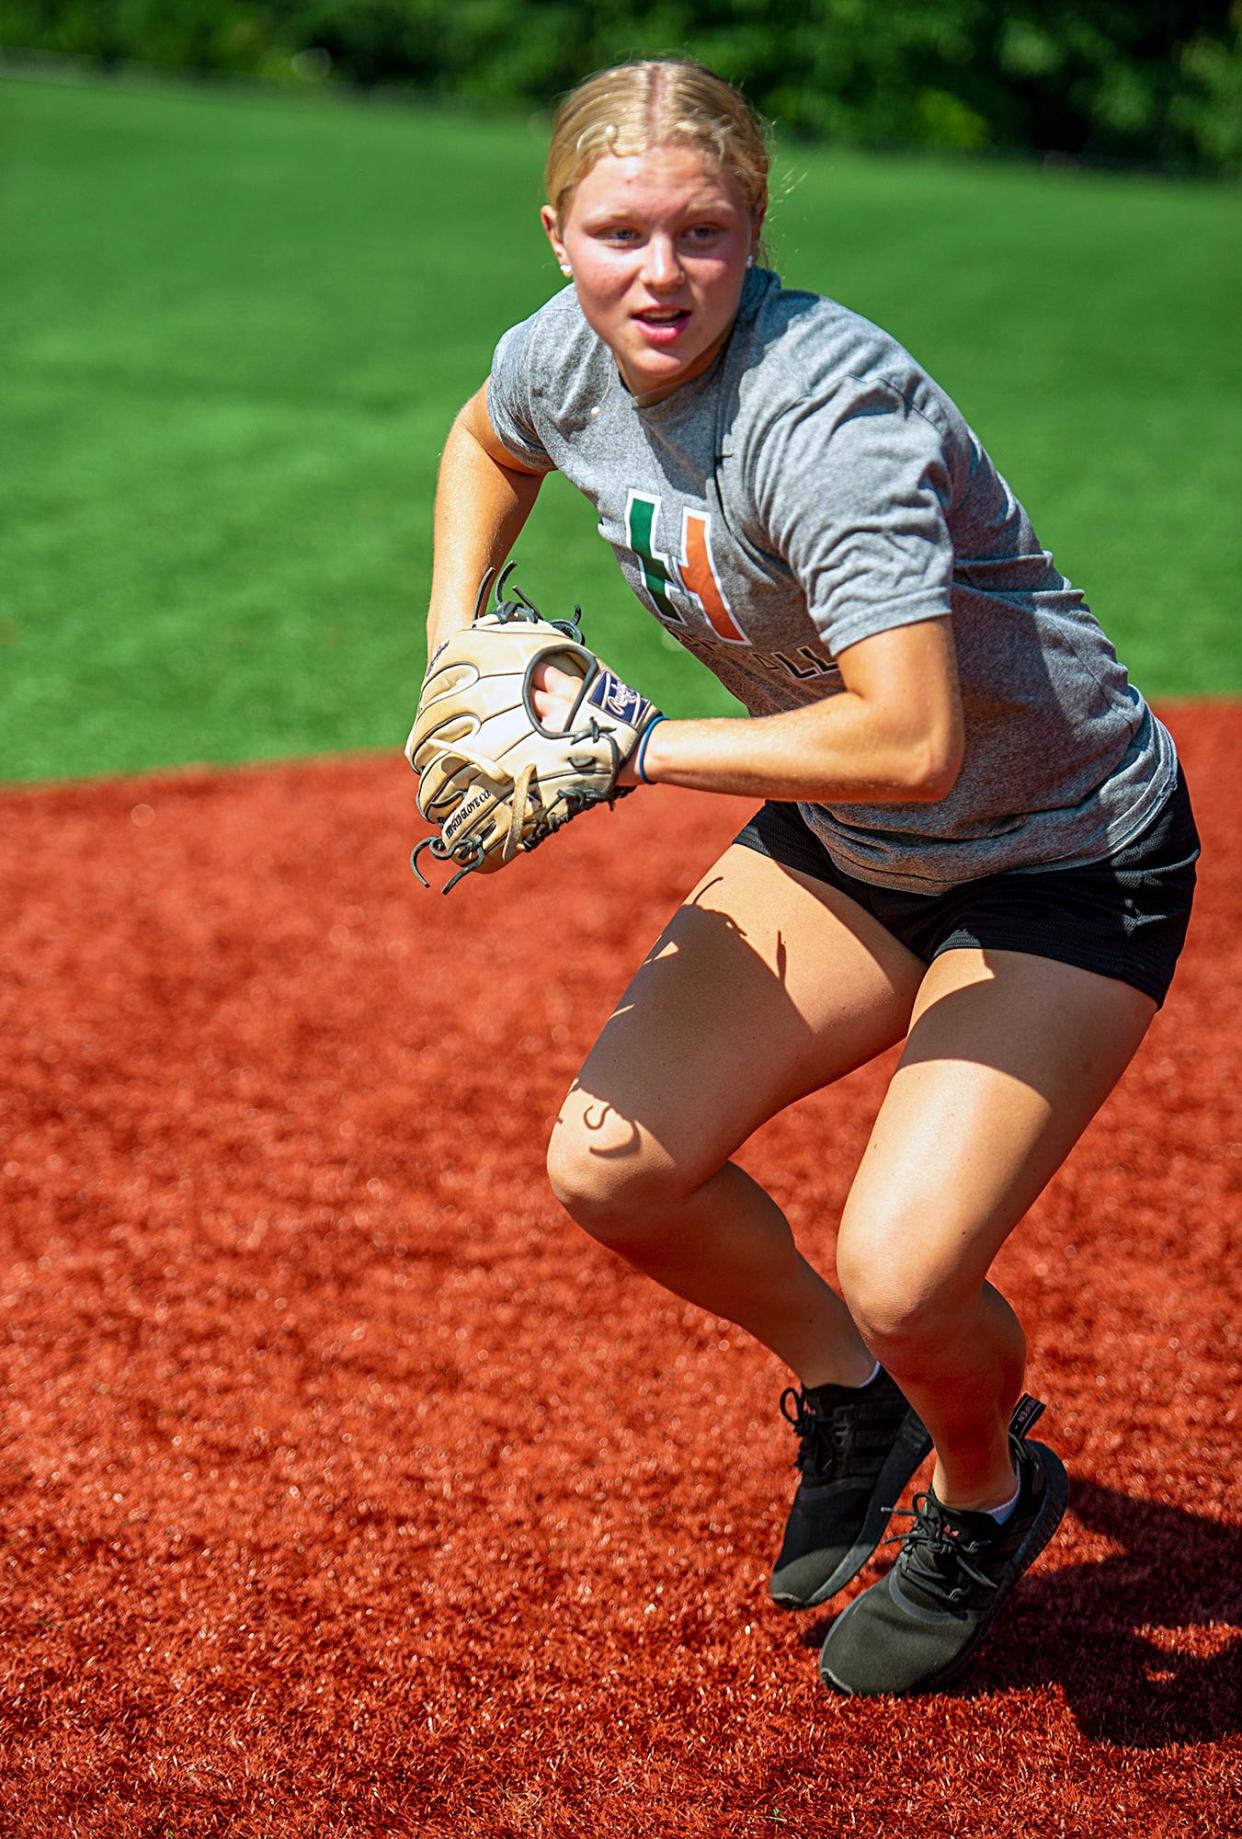 Hopkinton High School junior softball standout shortstop Holly Paharik was named to the NFCA All-Region First Team for Region X, here at the high school field, July 20, 2023.